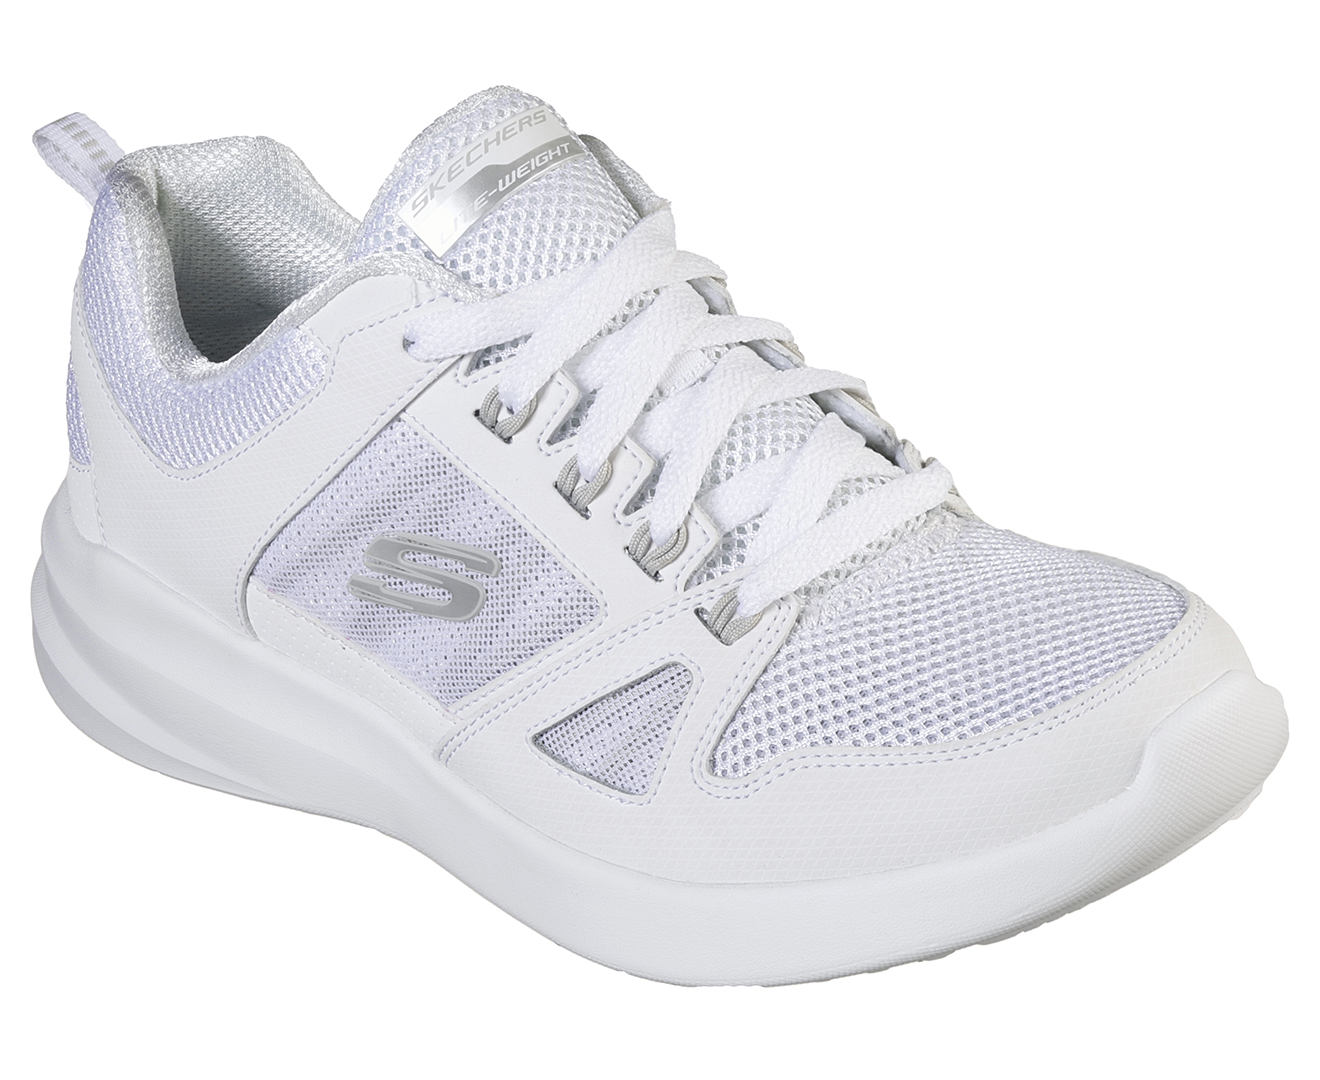 Skechers Women's Skybound Sports Training Shoes - White | Catch.co.nz